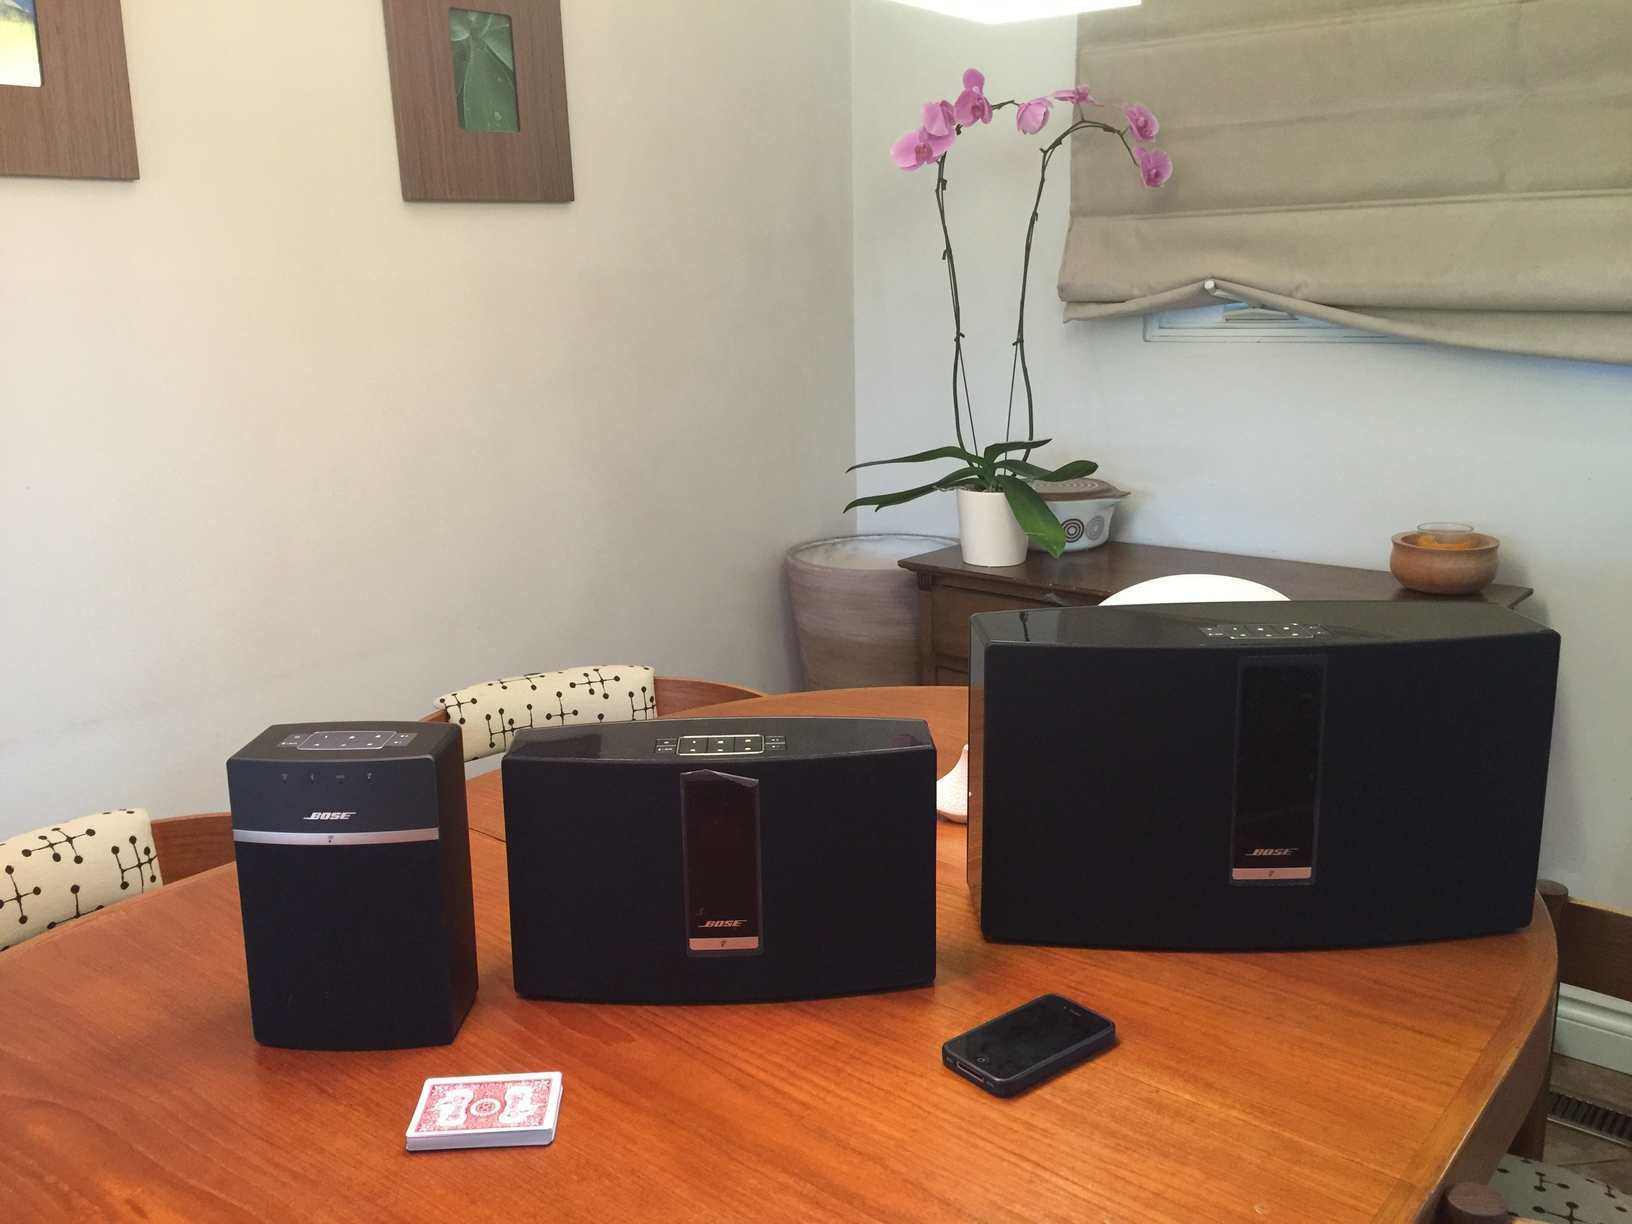 Bose Soundtouch series: Reviewing Soundtouch 10, 20 30